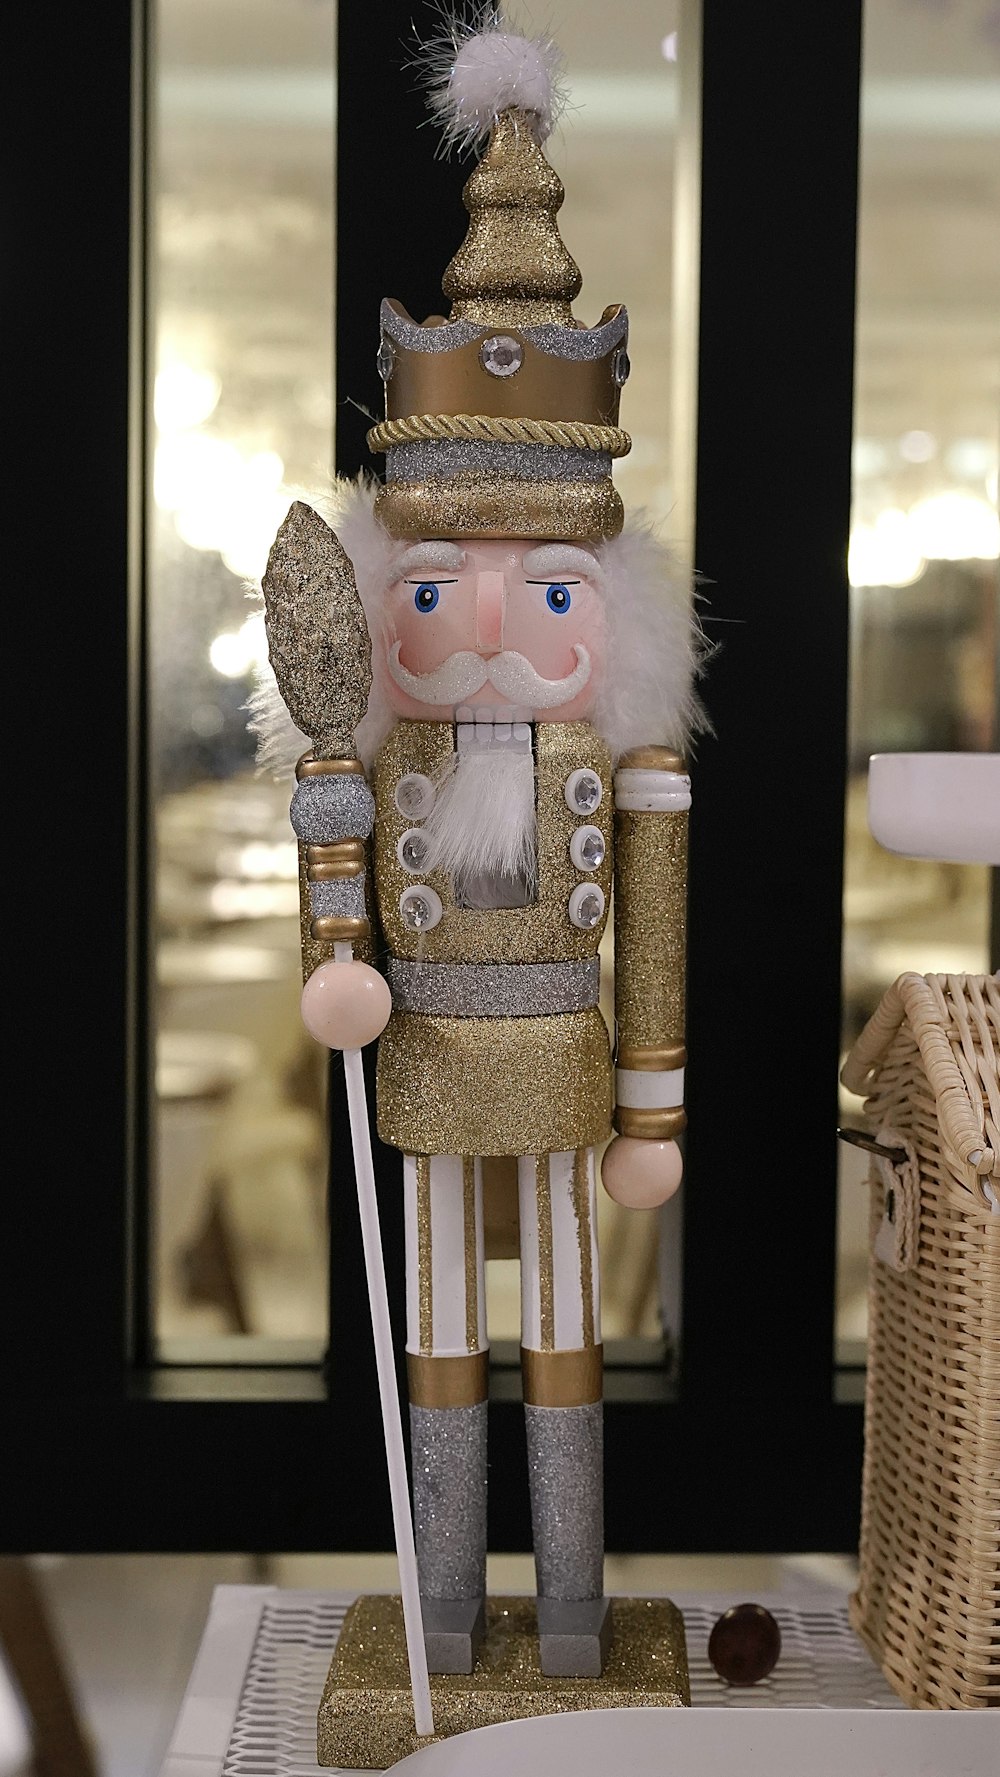 a nutcracker is standing next to a basket